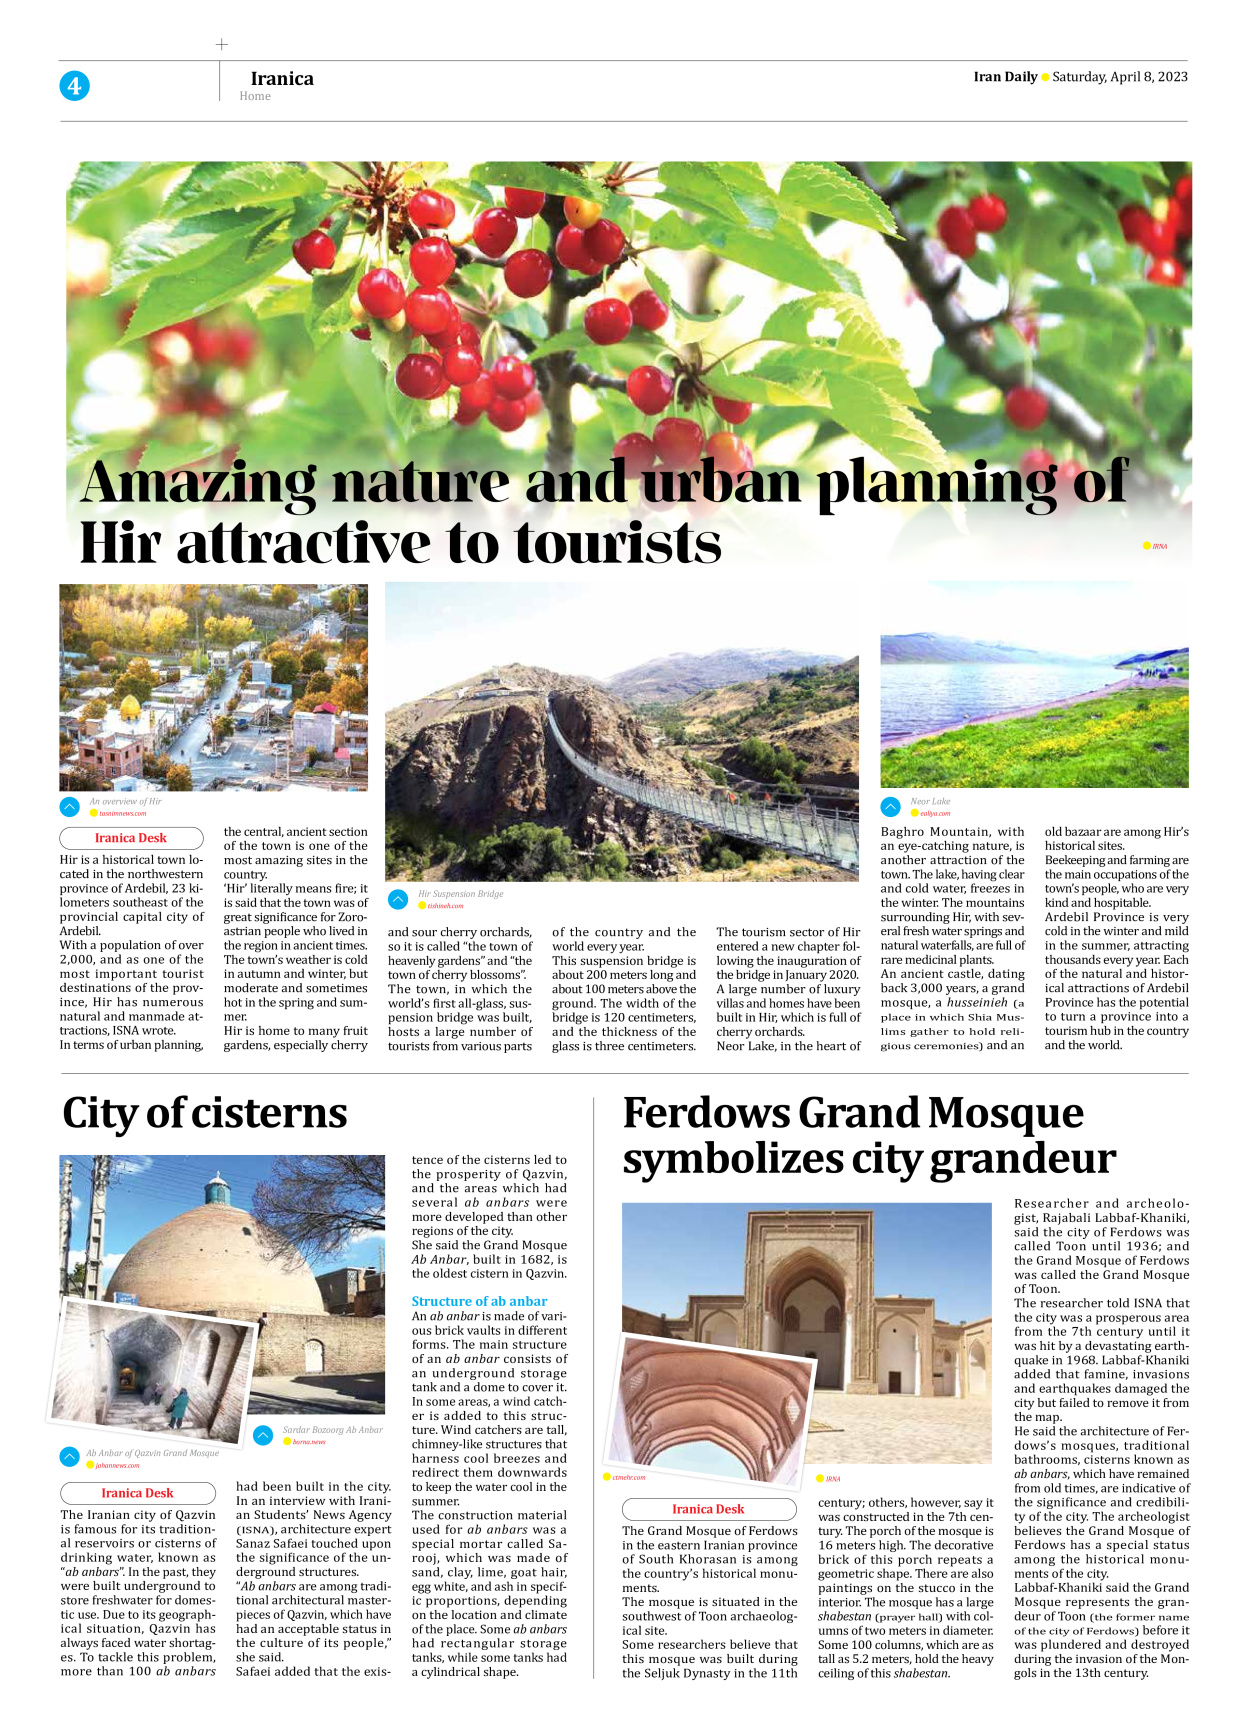 Iran Daily - Number Seven Thousand Two Hundred and Sixty Four - 08 April 2023 - Page 4